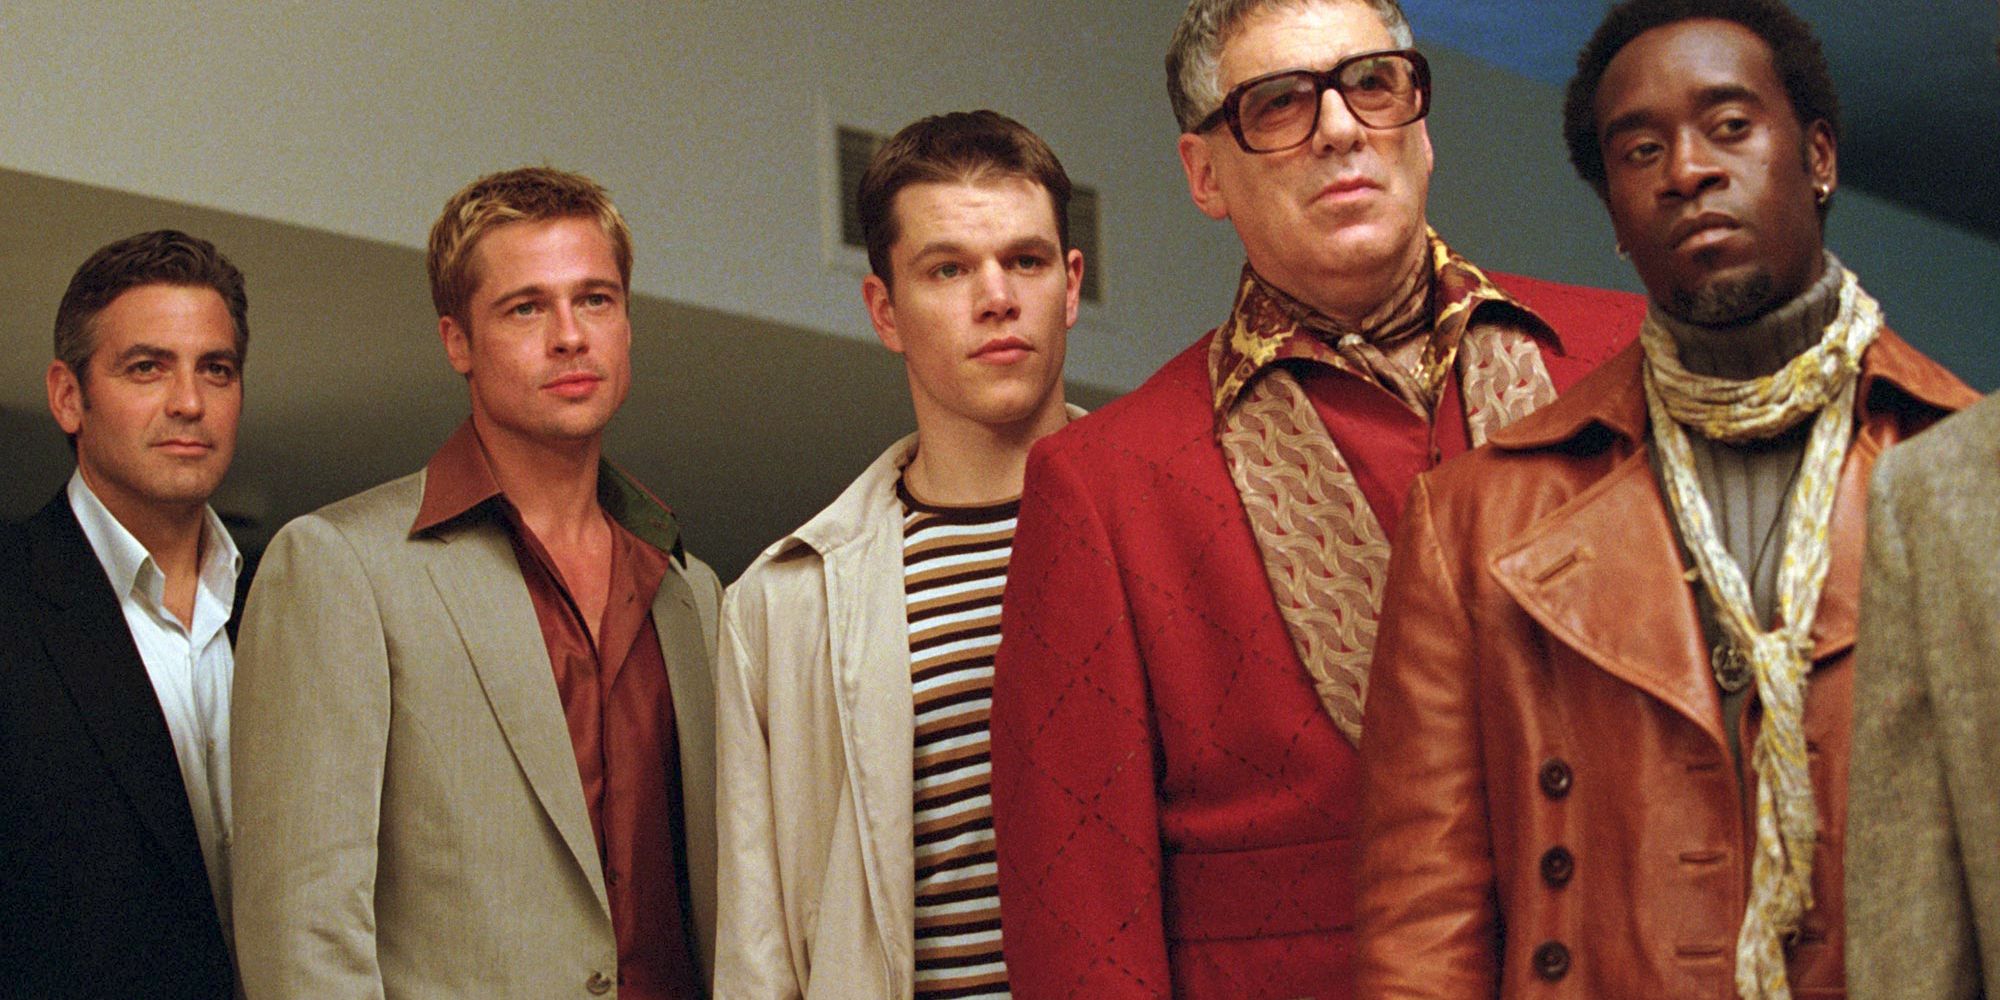 A crew of criminals stand together as they plot a casino heist in 'Ocean's Eleven'.